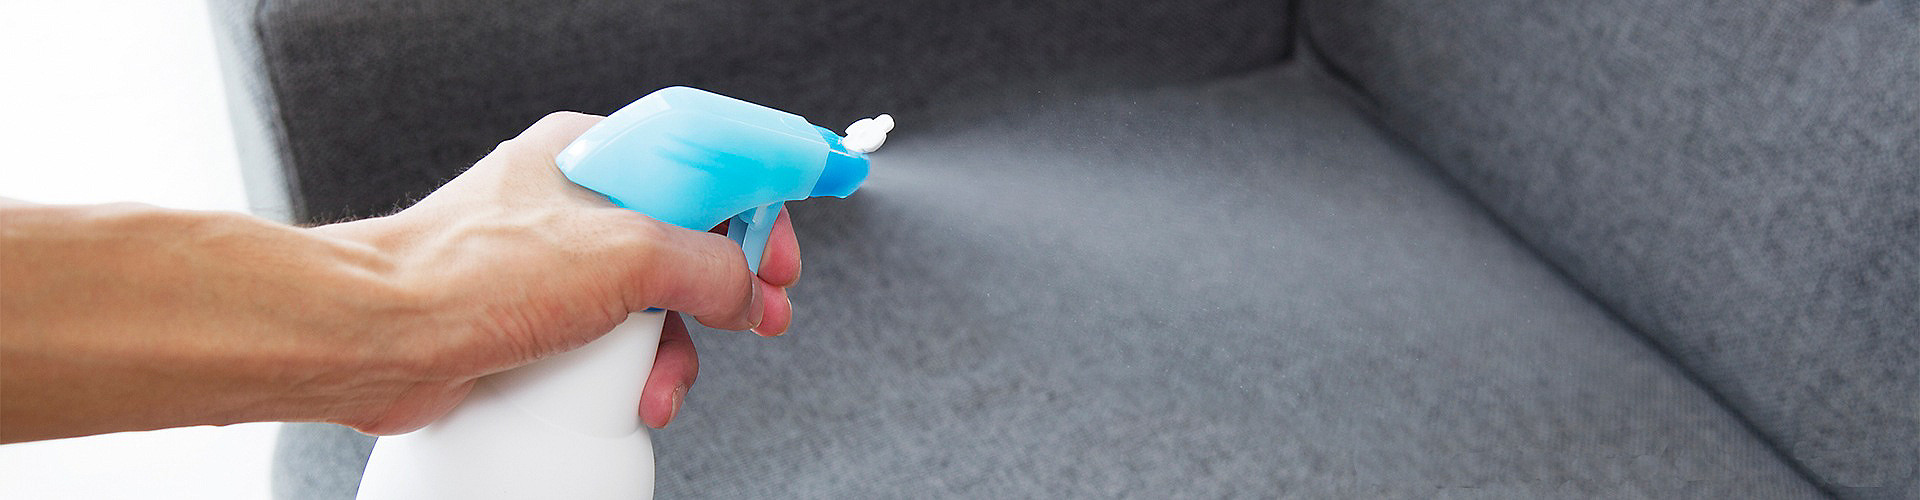 Person cleaning sofa with spray to get rid of cigarette smell